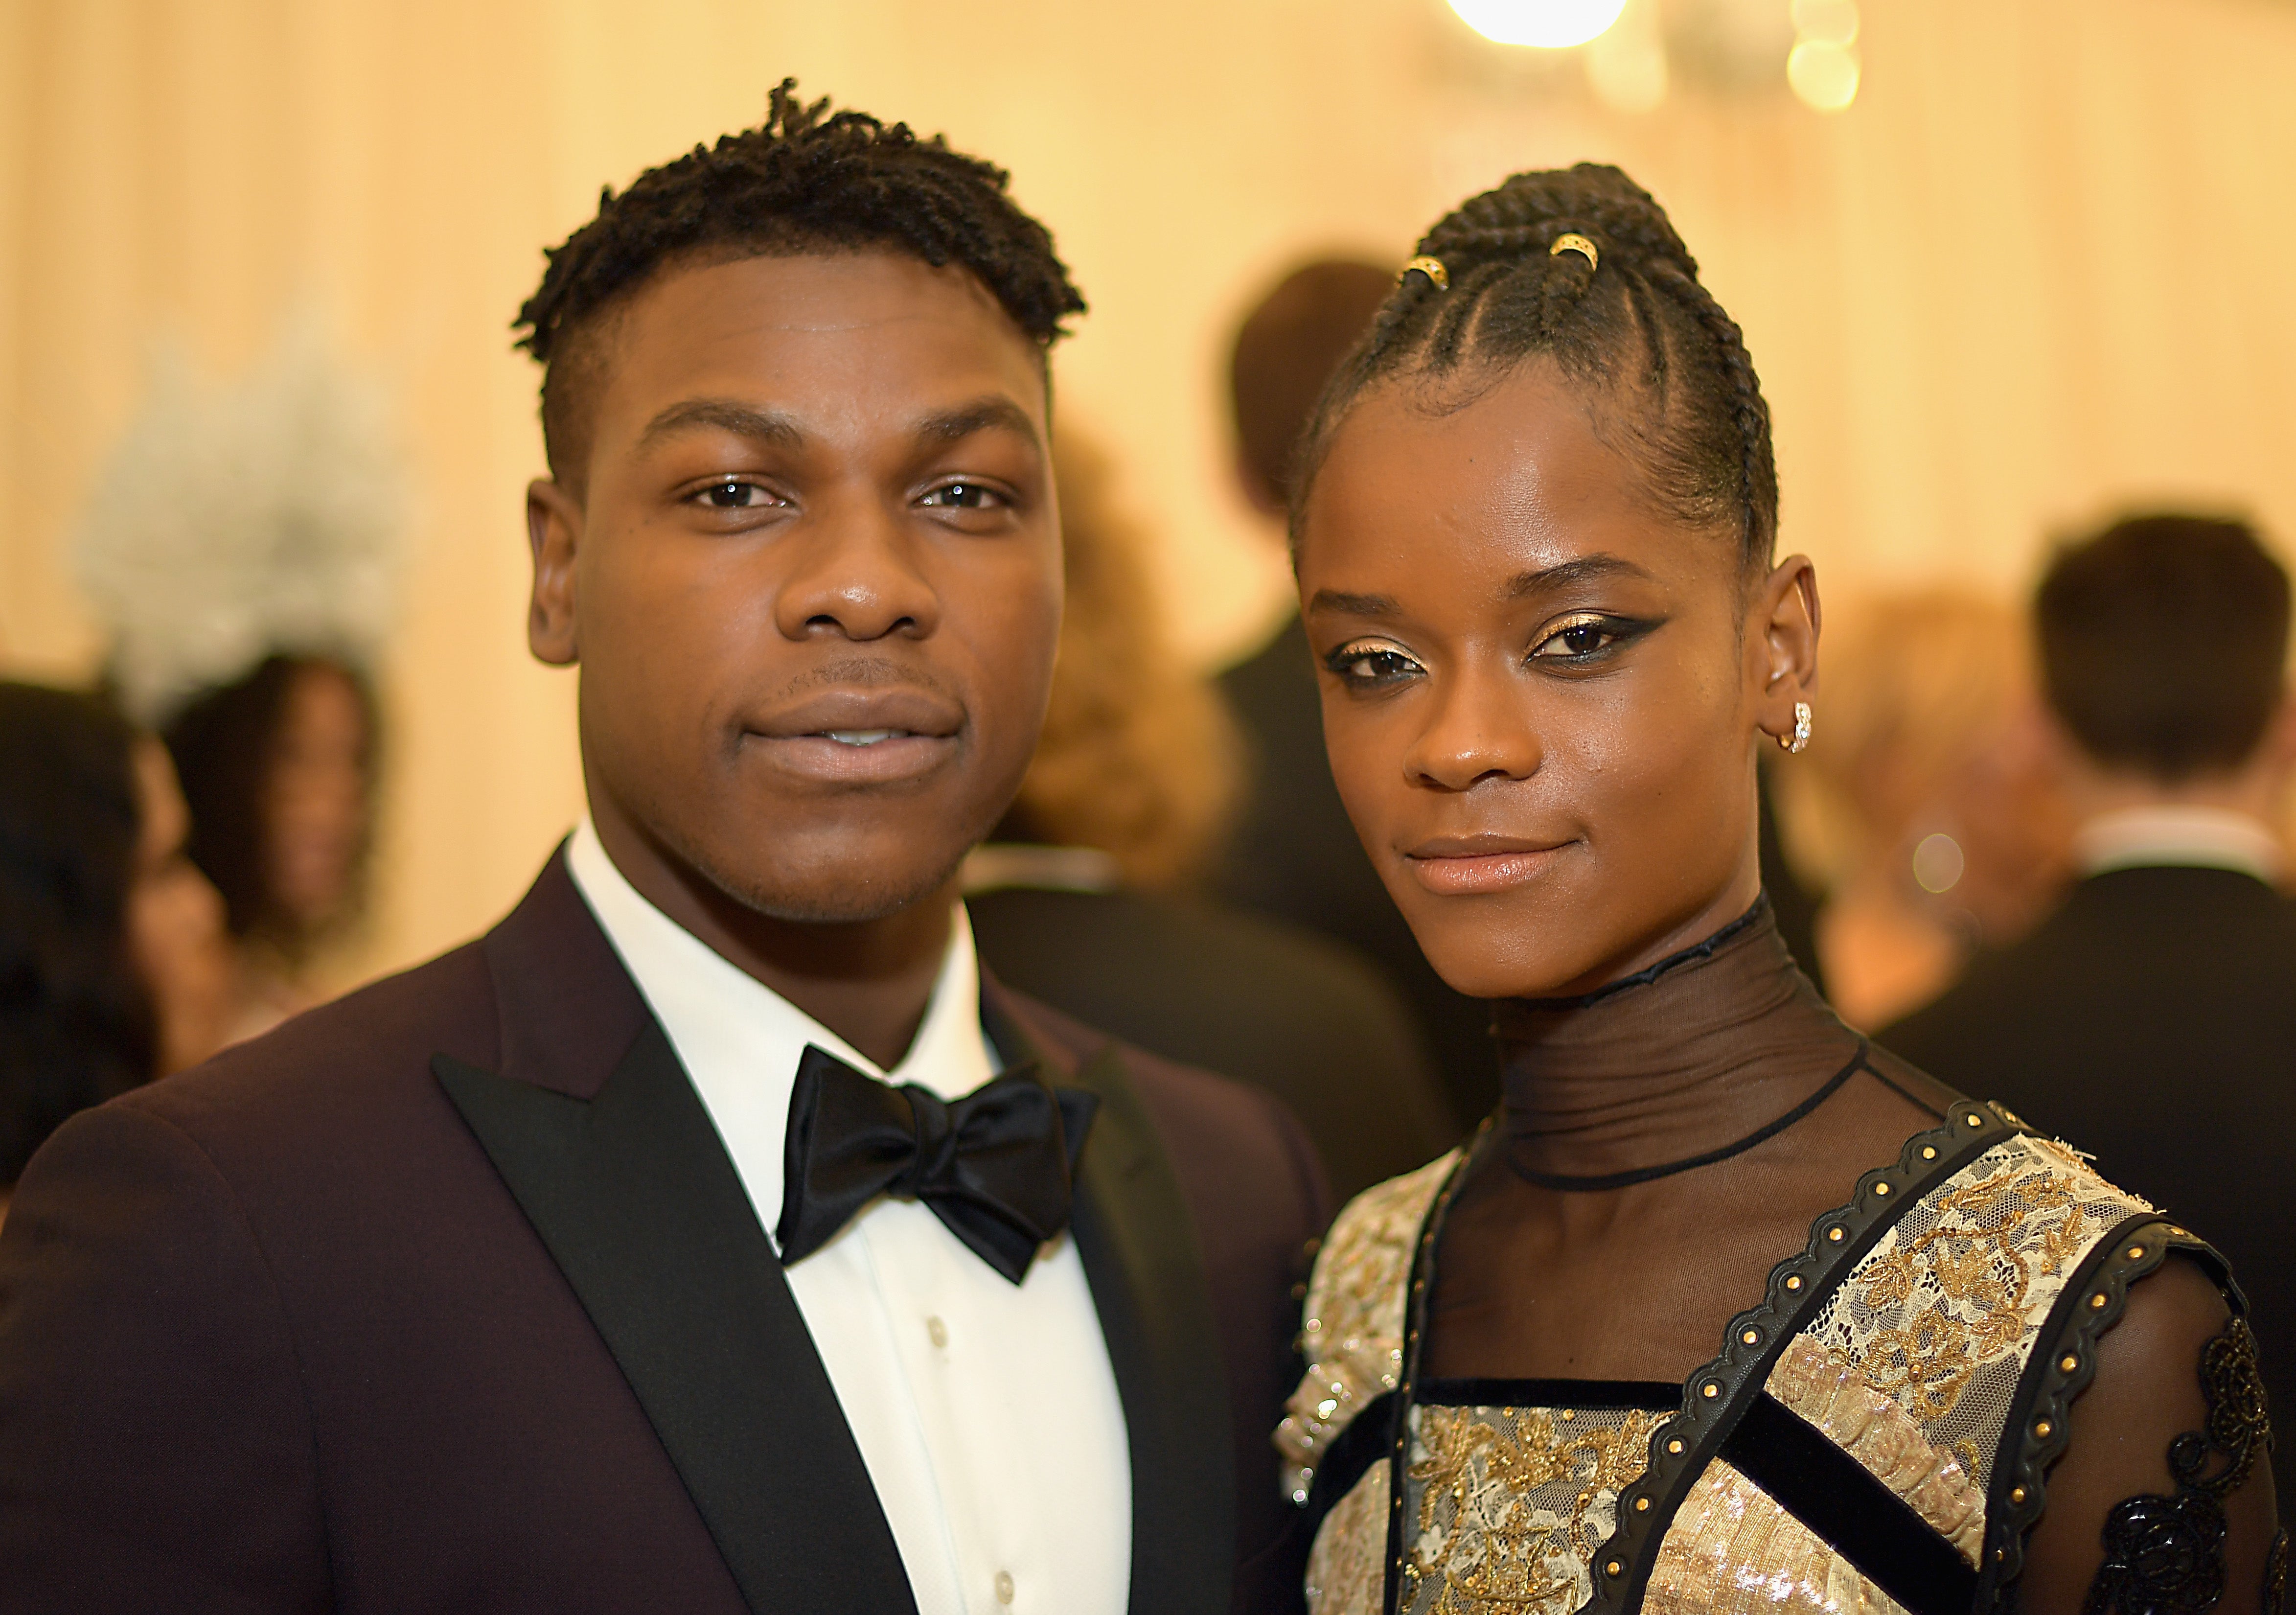 Letitia Wright And John Boyega To Star In Sci-Fi Love Story 'Hold Back The Stars'